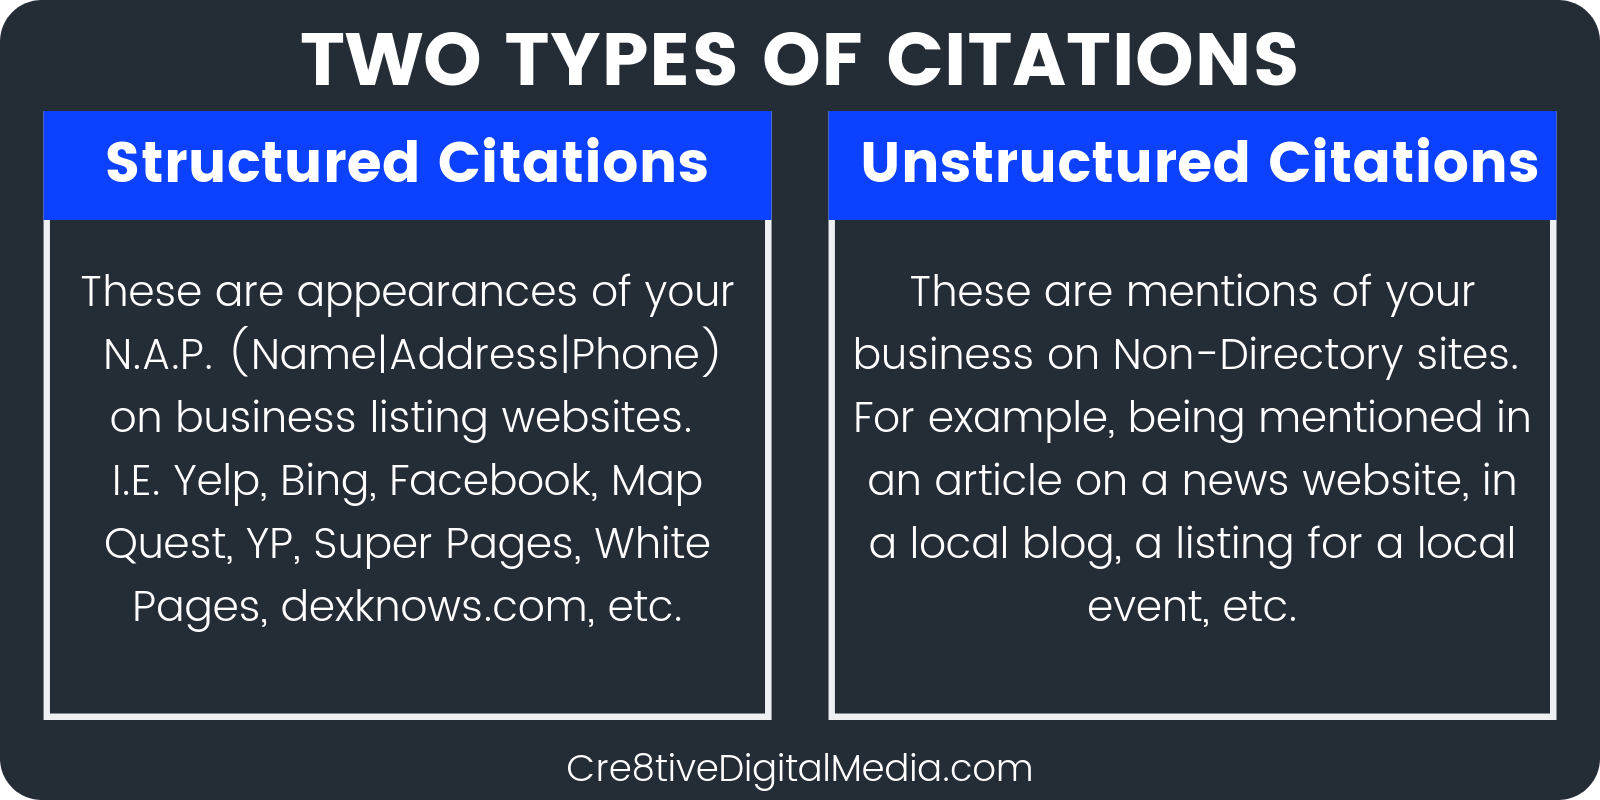 There are two types of Local Citations: Structured & Unstructured 